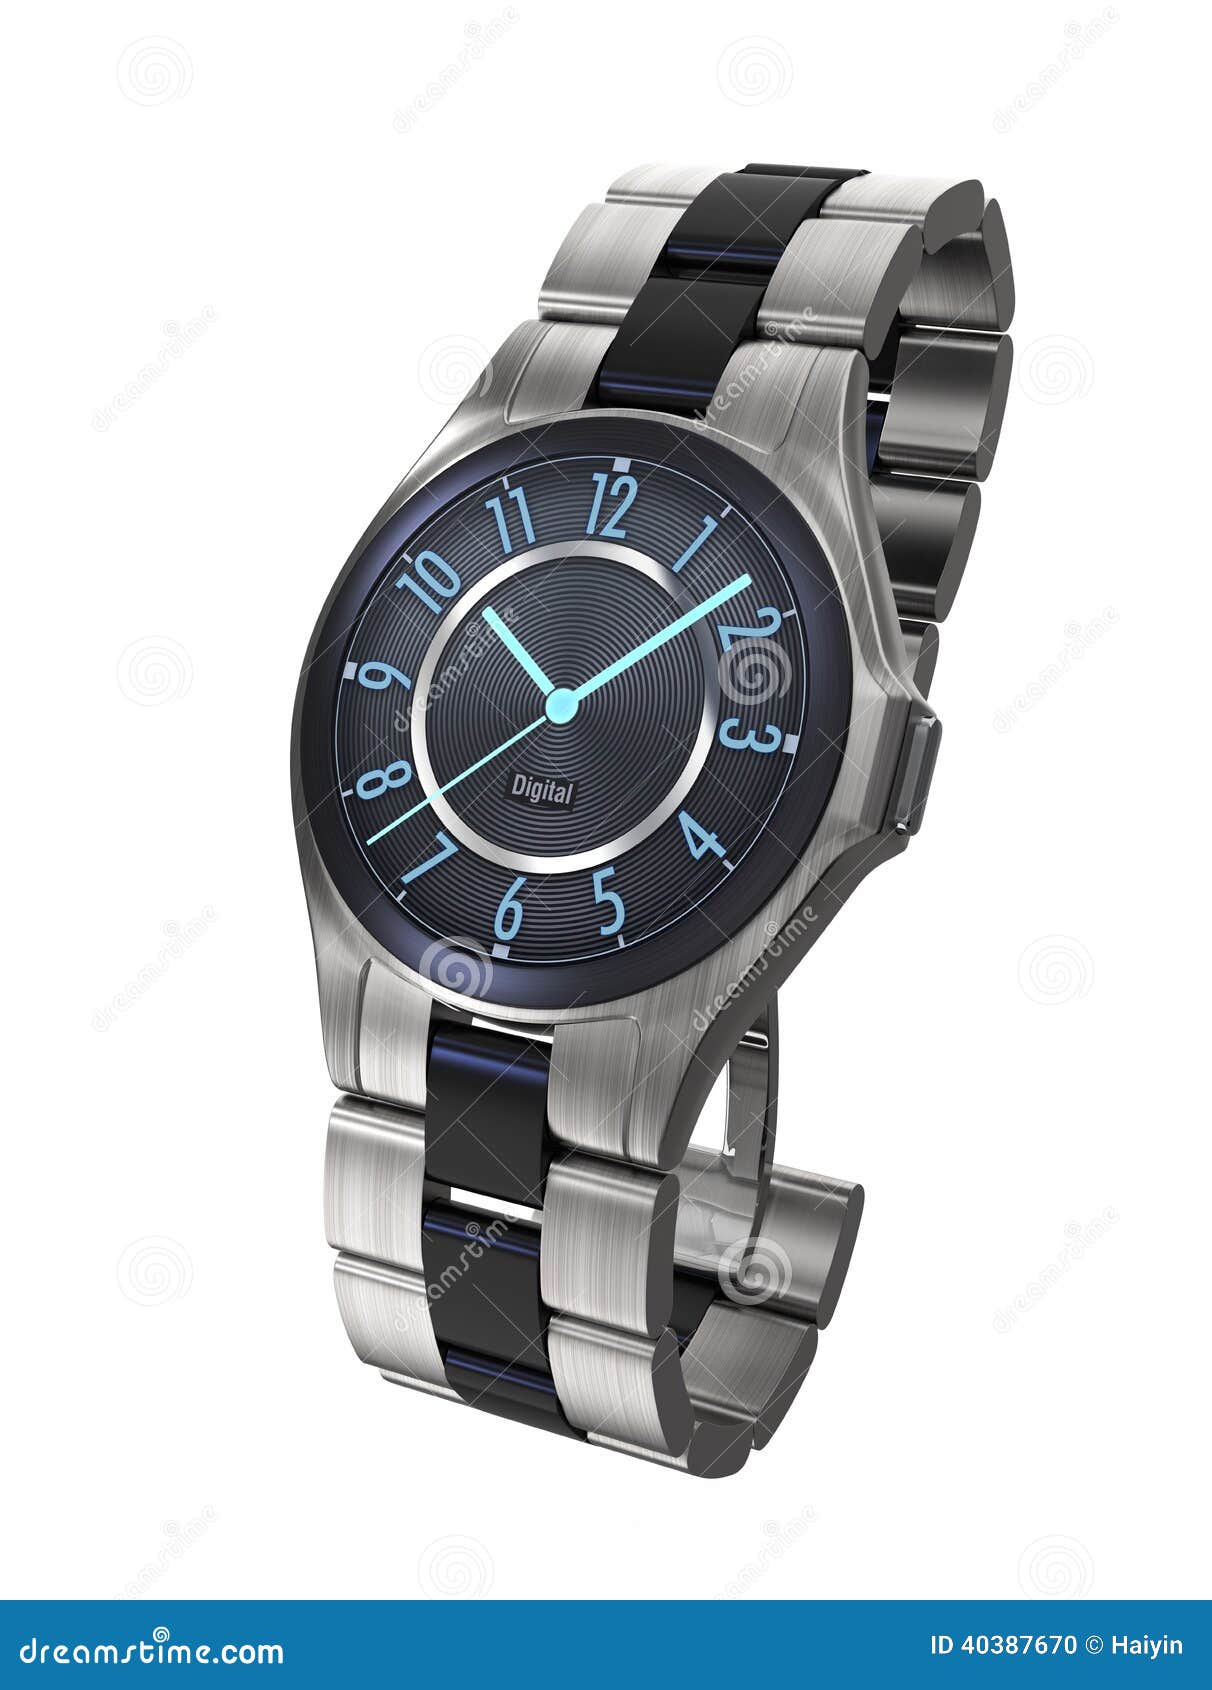 Change up free smart watch how wallpaper to blind ggl 304